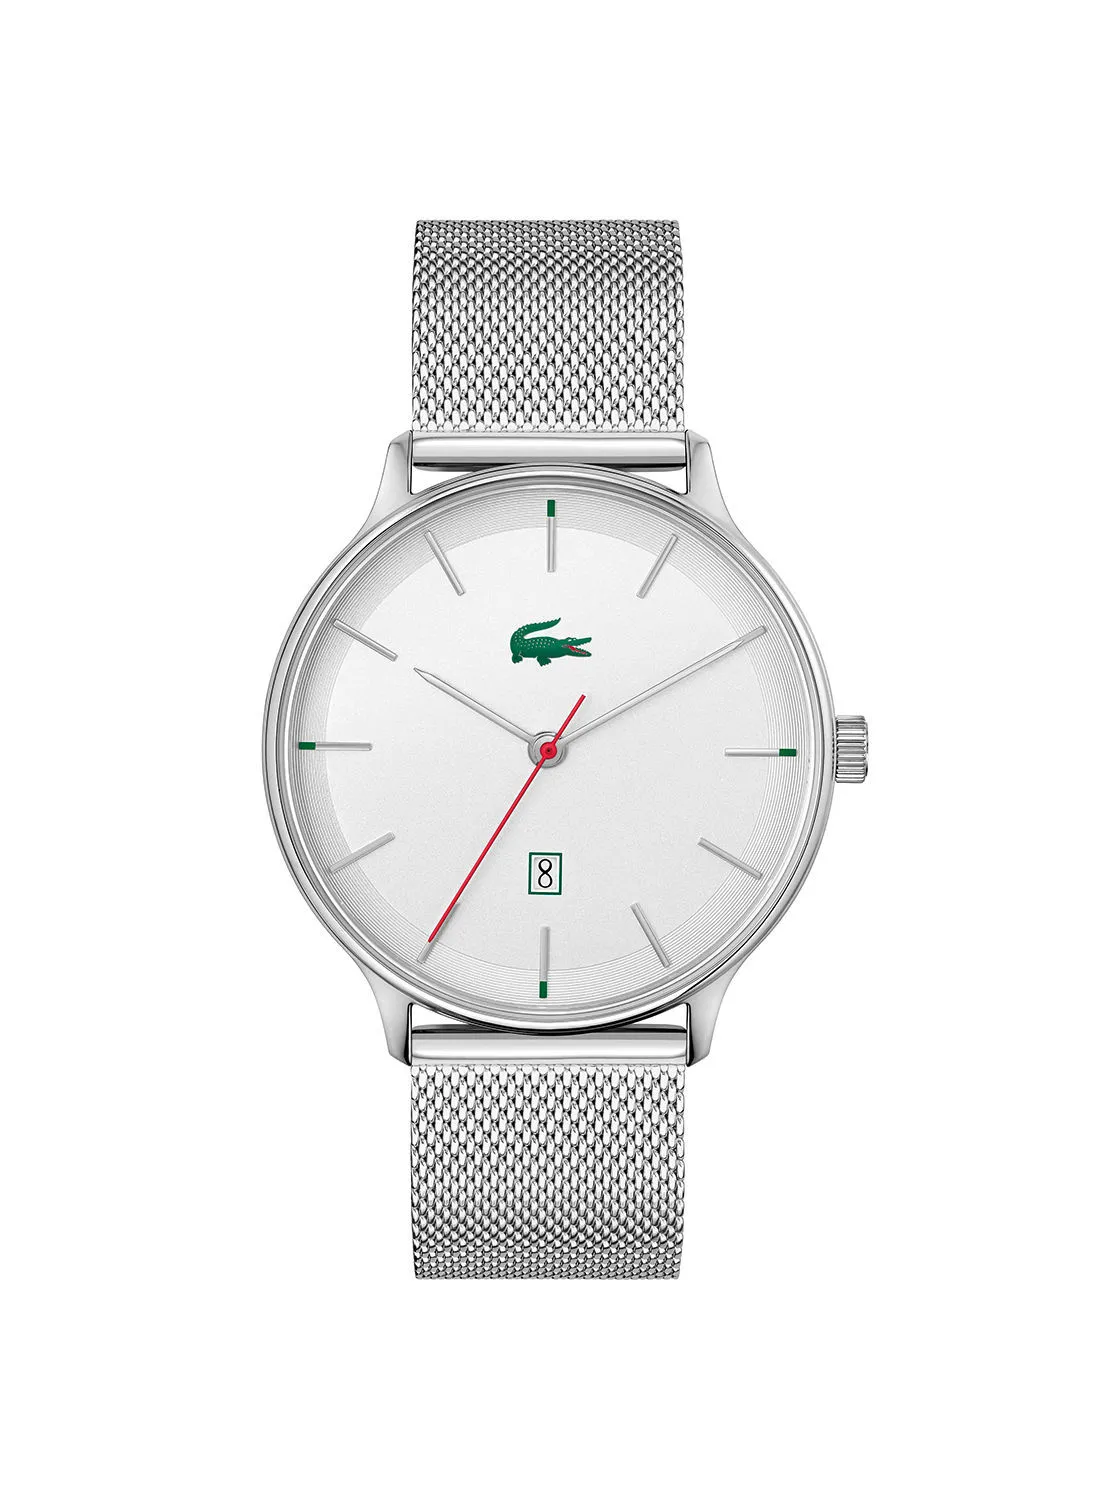 LACOSTE Stainless Steel Analog Wrist Watch 2011201